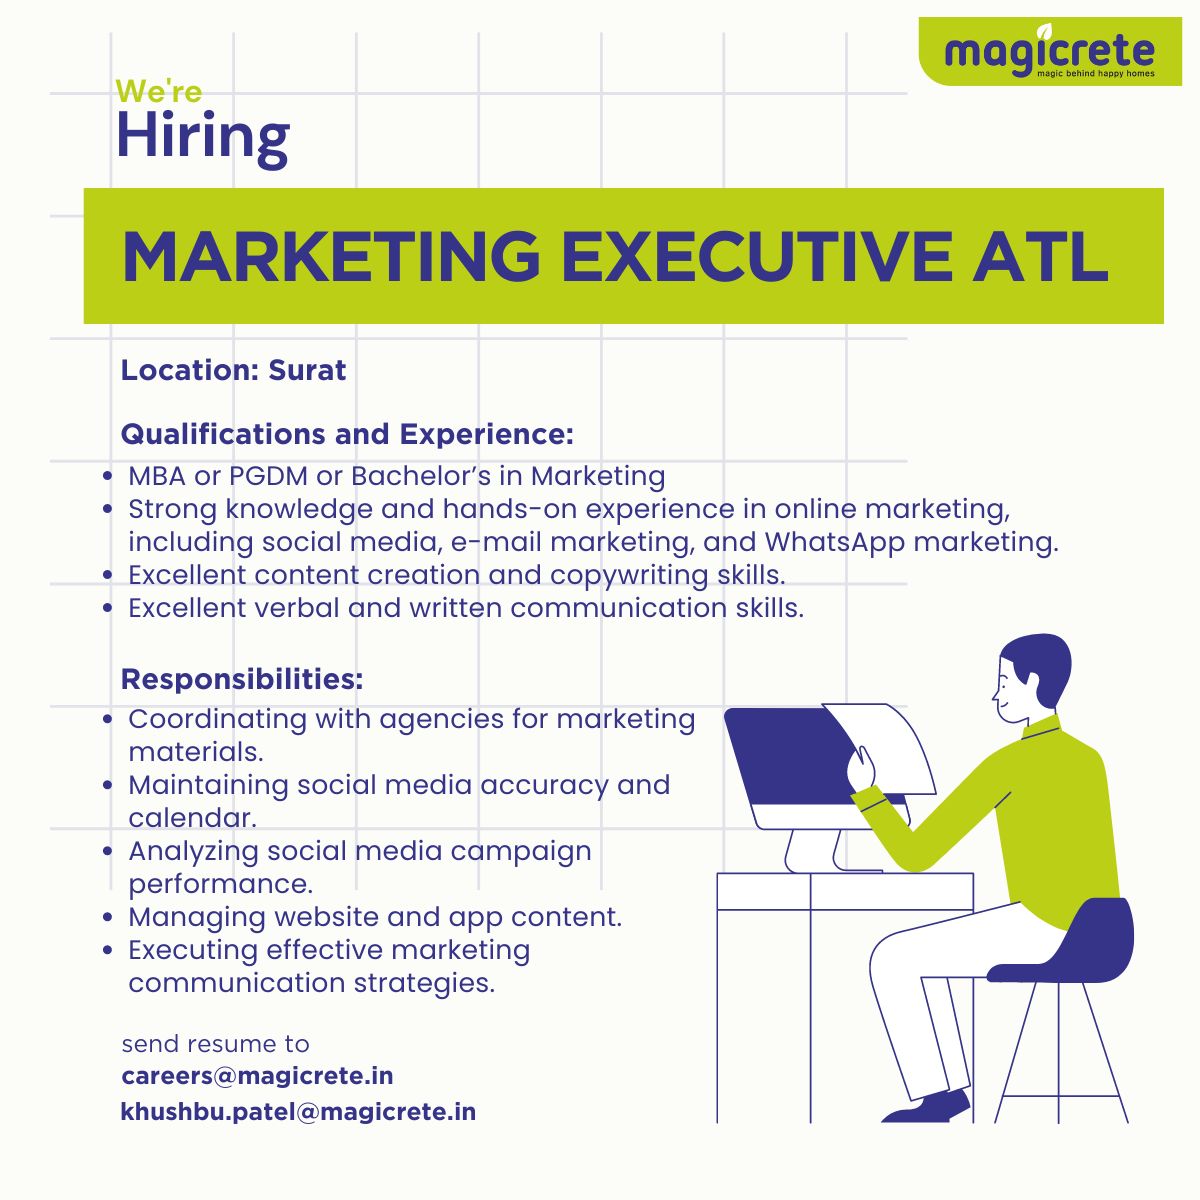 Join our team as a #𝐌𝐚𝐫𝐤𝐞𝐭𝐢𝐧𝐠𝐄𝐱𝐞𝐜𝐮𝐭𝐢𝐯𝐞 - 𝐀𝐓𝐋 and be part of crafting impactful #marketing & #communication strategies! 🚀
𝐋𝐨𝐜𝐚𝐭𝐢𝐨𝐧: 𝐒𝐮𝐫𝐚𝐭 

#Magicrete #AACBlocks #BuildingMaterials